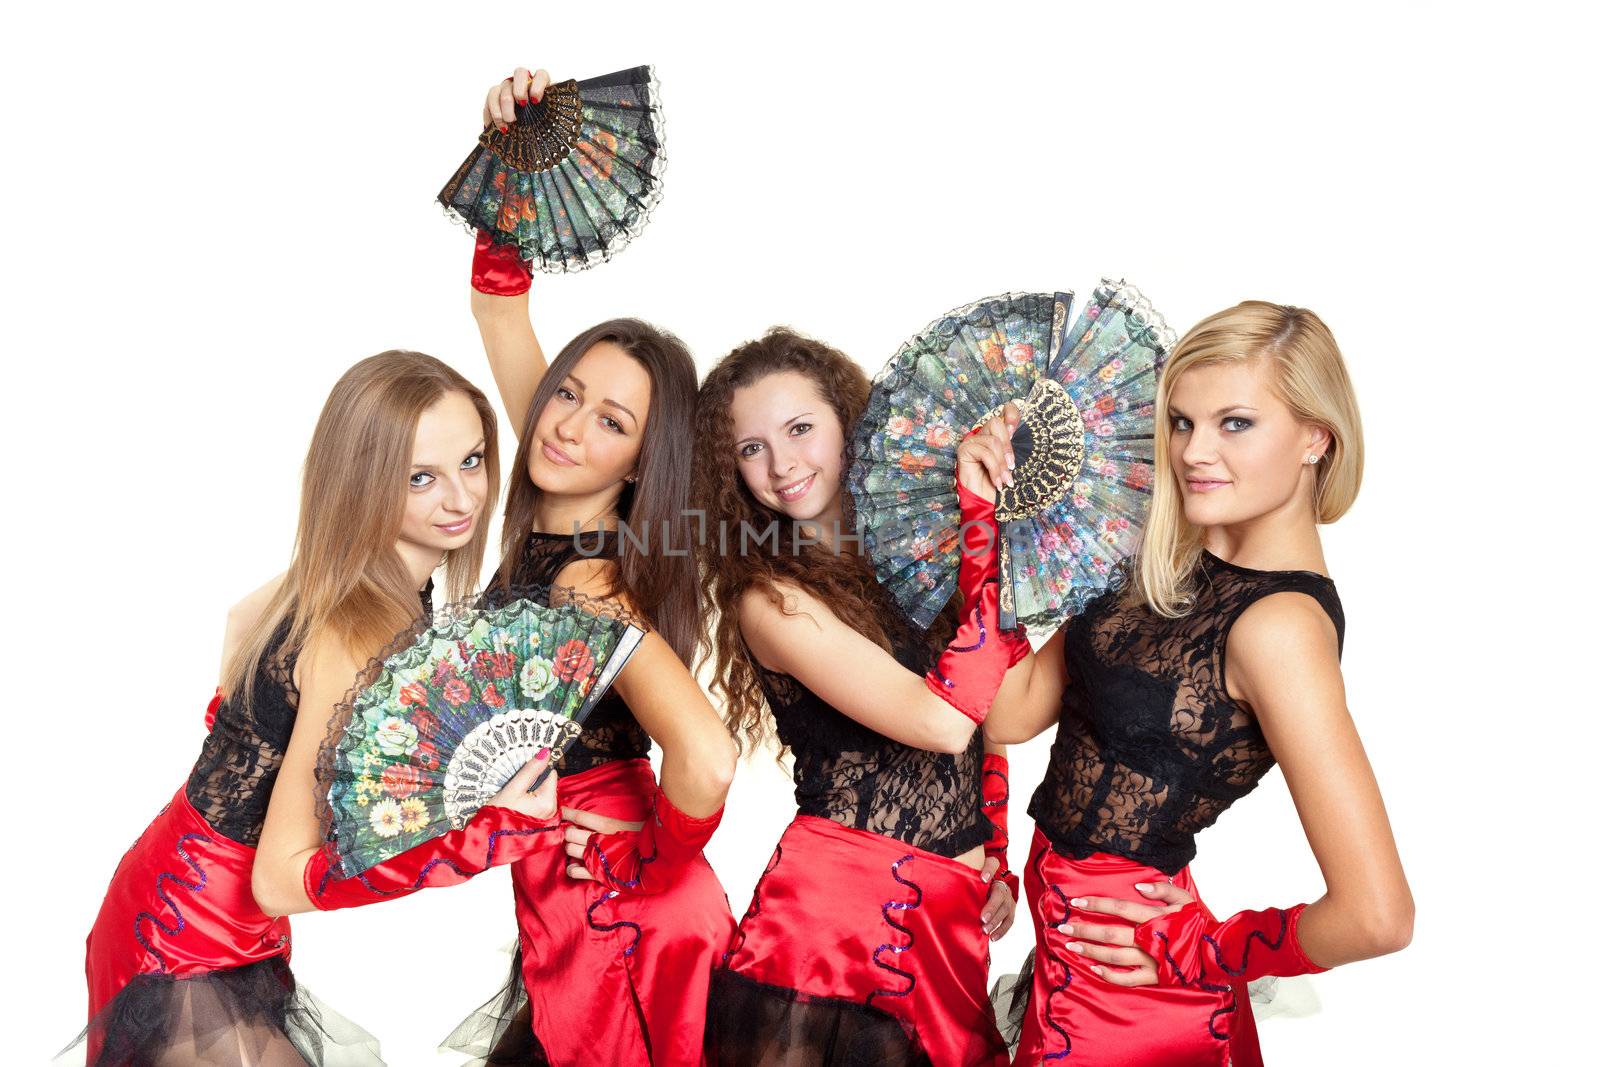 Image of the dance group wearing stage costumes